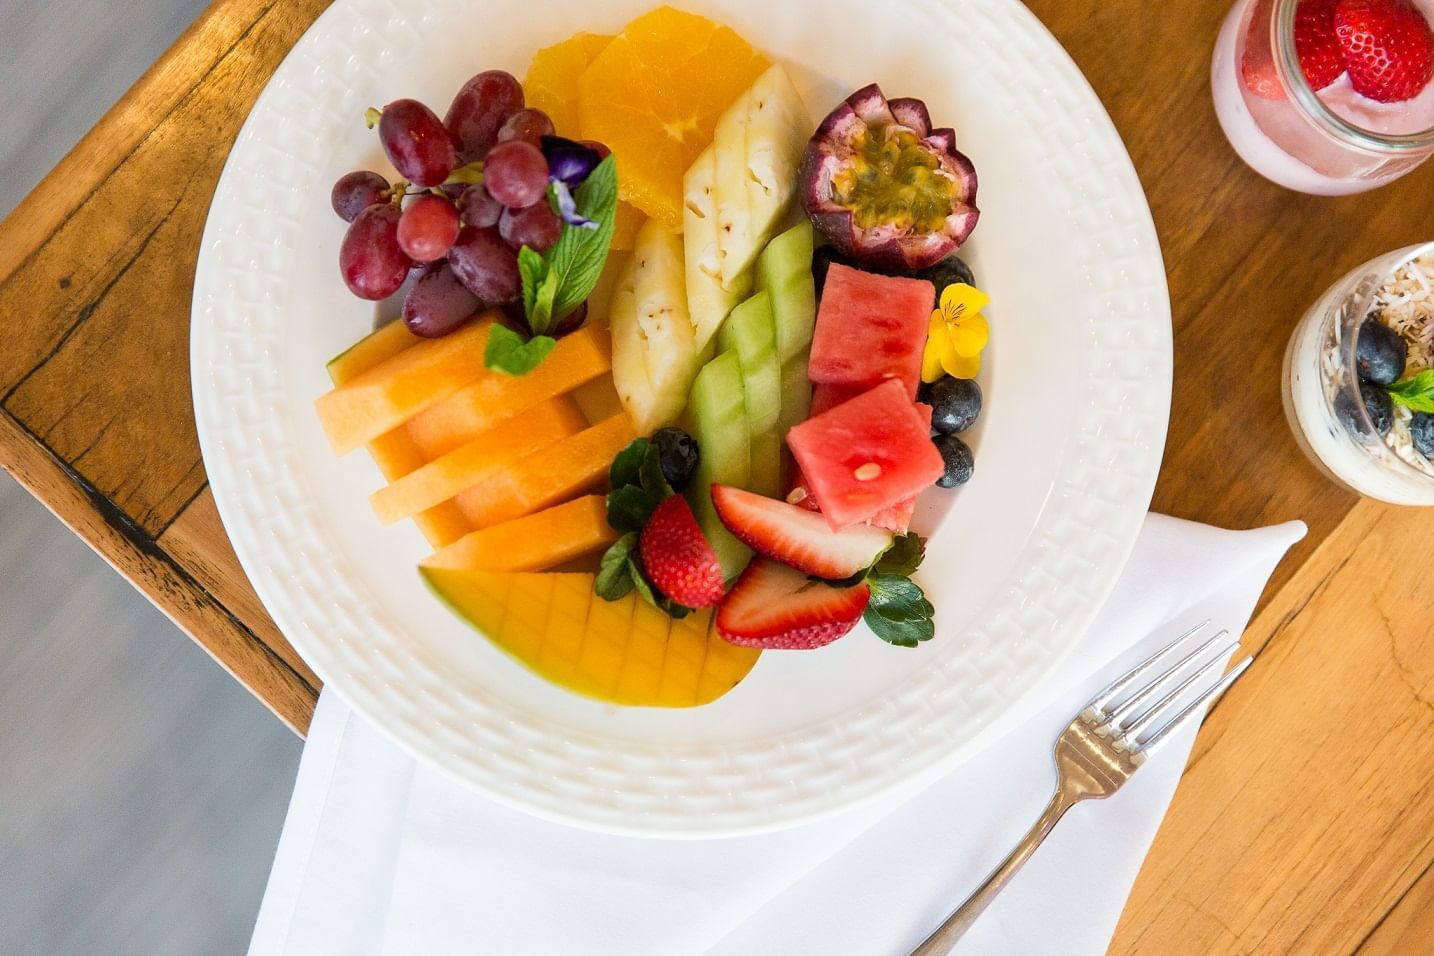 A plate of fruits in Novotel Darling Harbour
